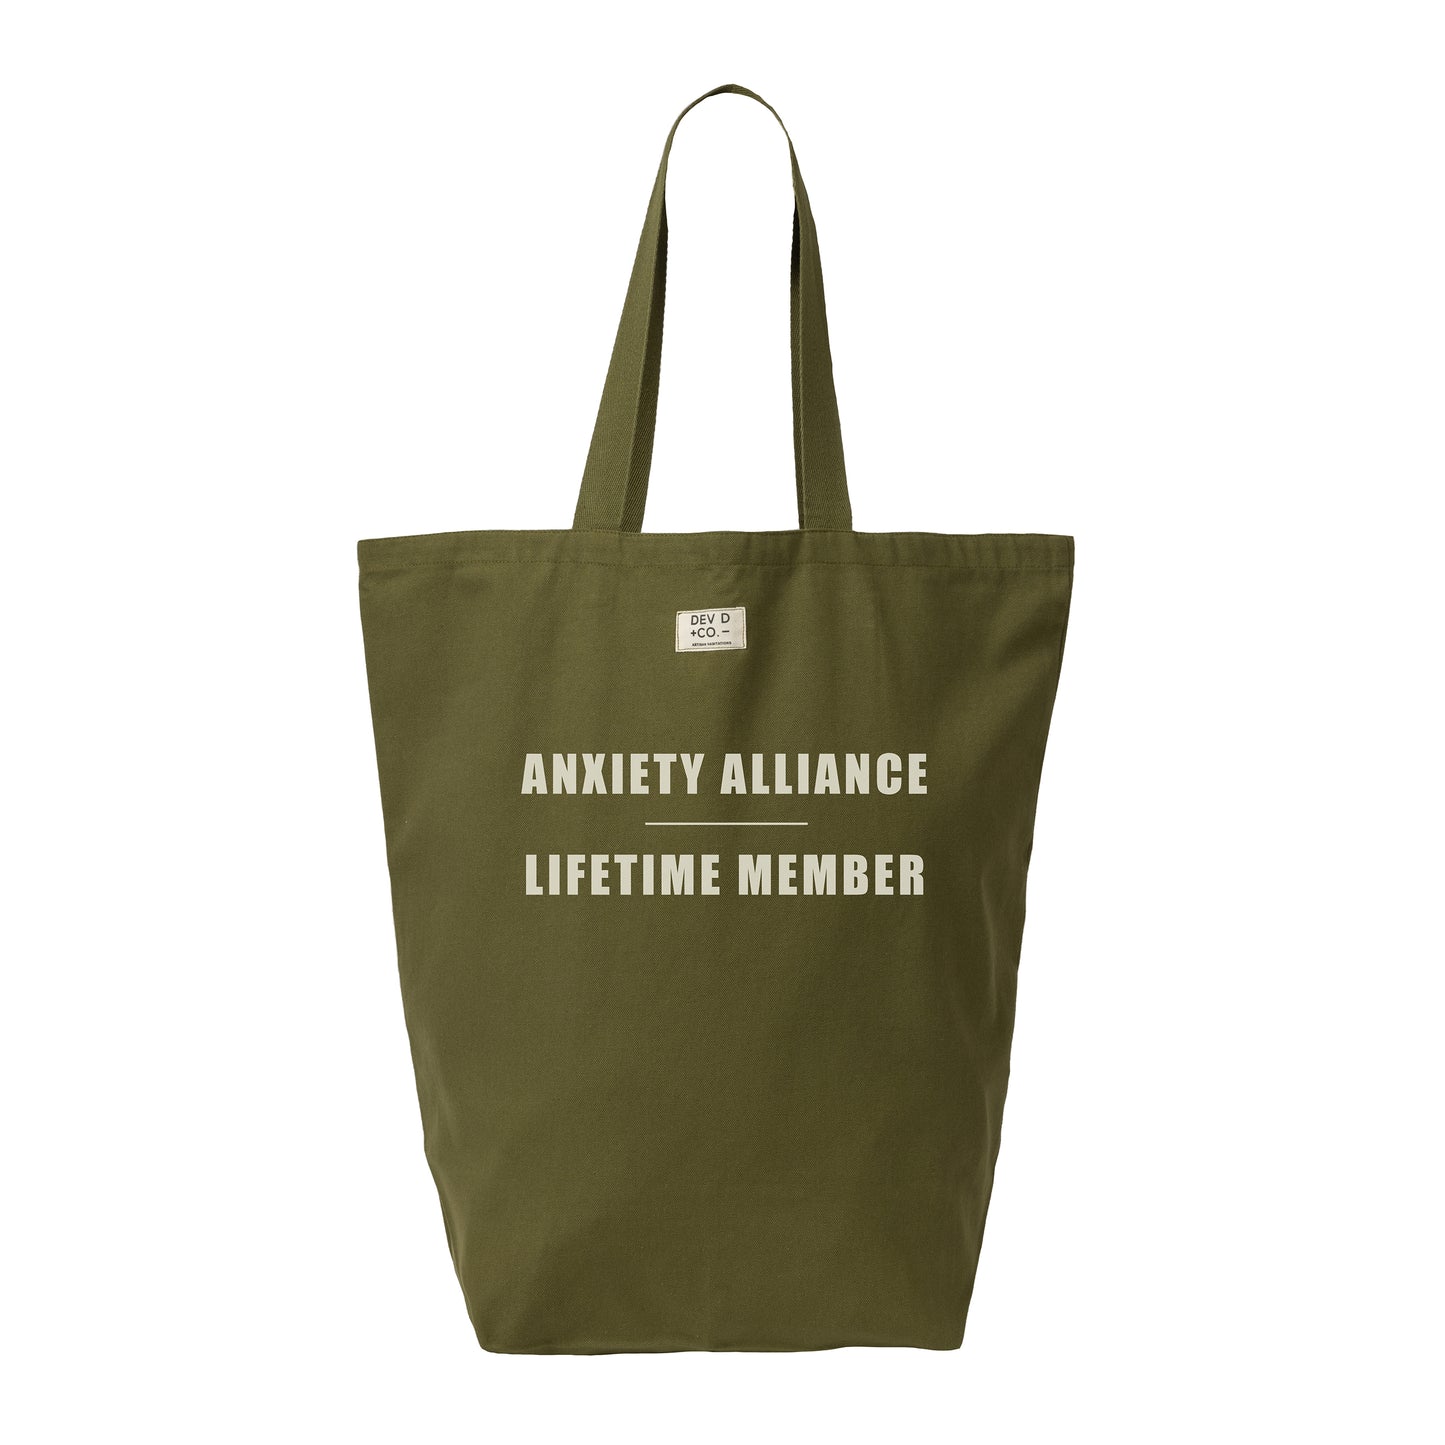 Anxiety Alliance - Canvas Tote Bag with Pocket - Large Tote